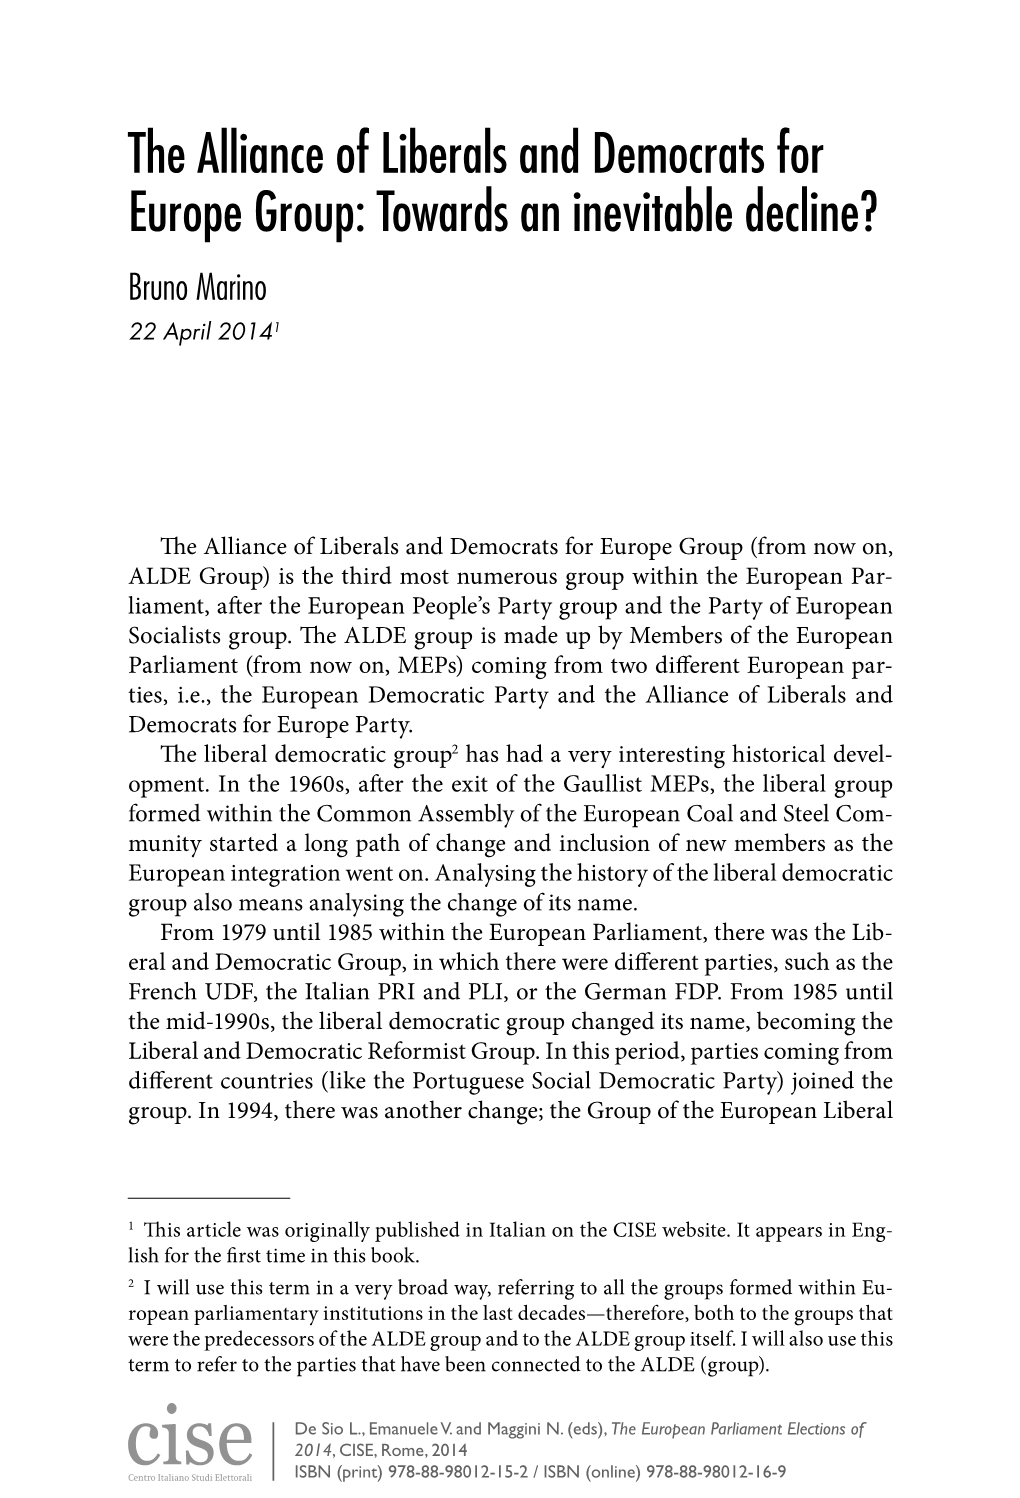 The Alliance of Liberals and Democrats for Europe Group: Towards an Inevitable Decline? Bruno Marino 22 April 20141